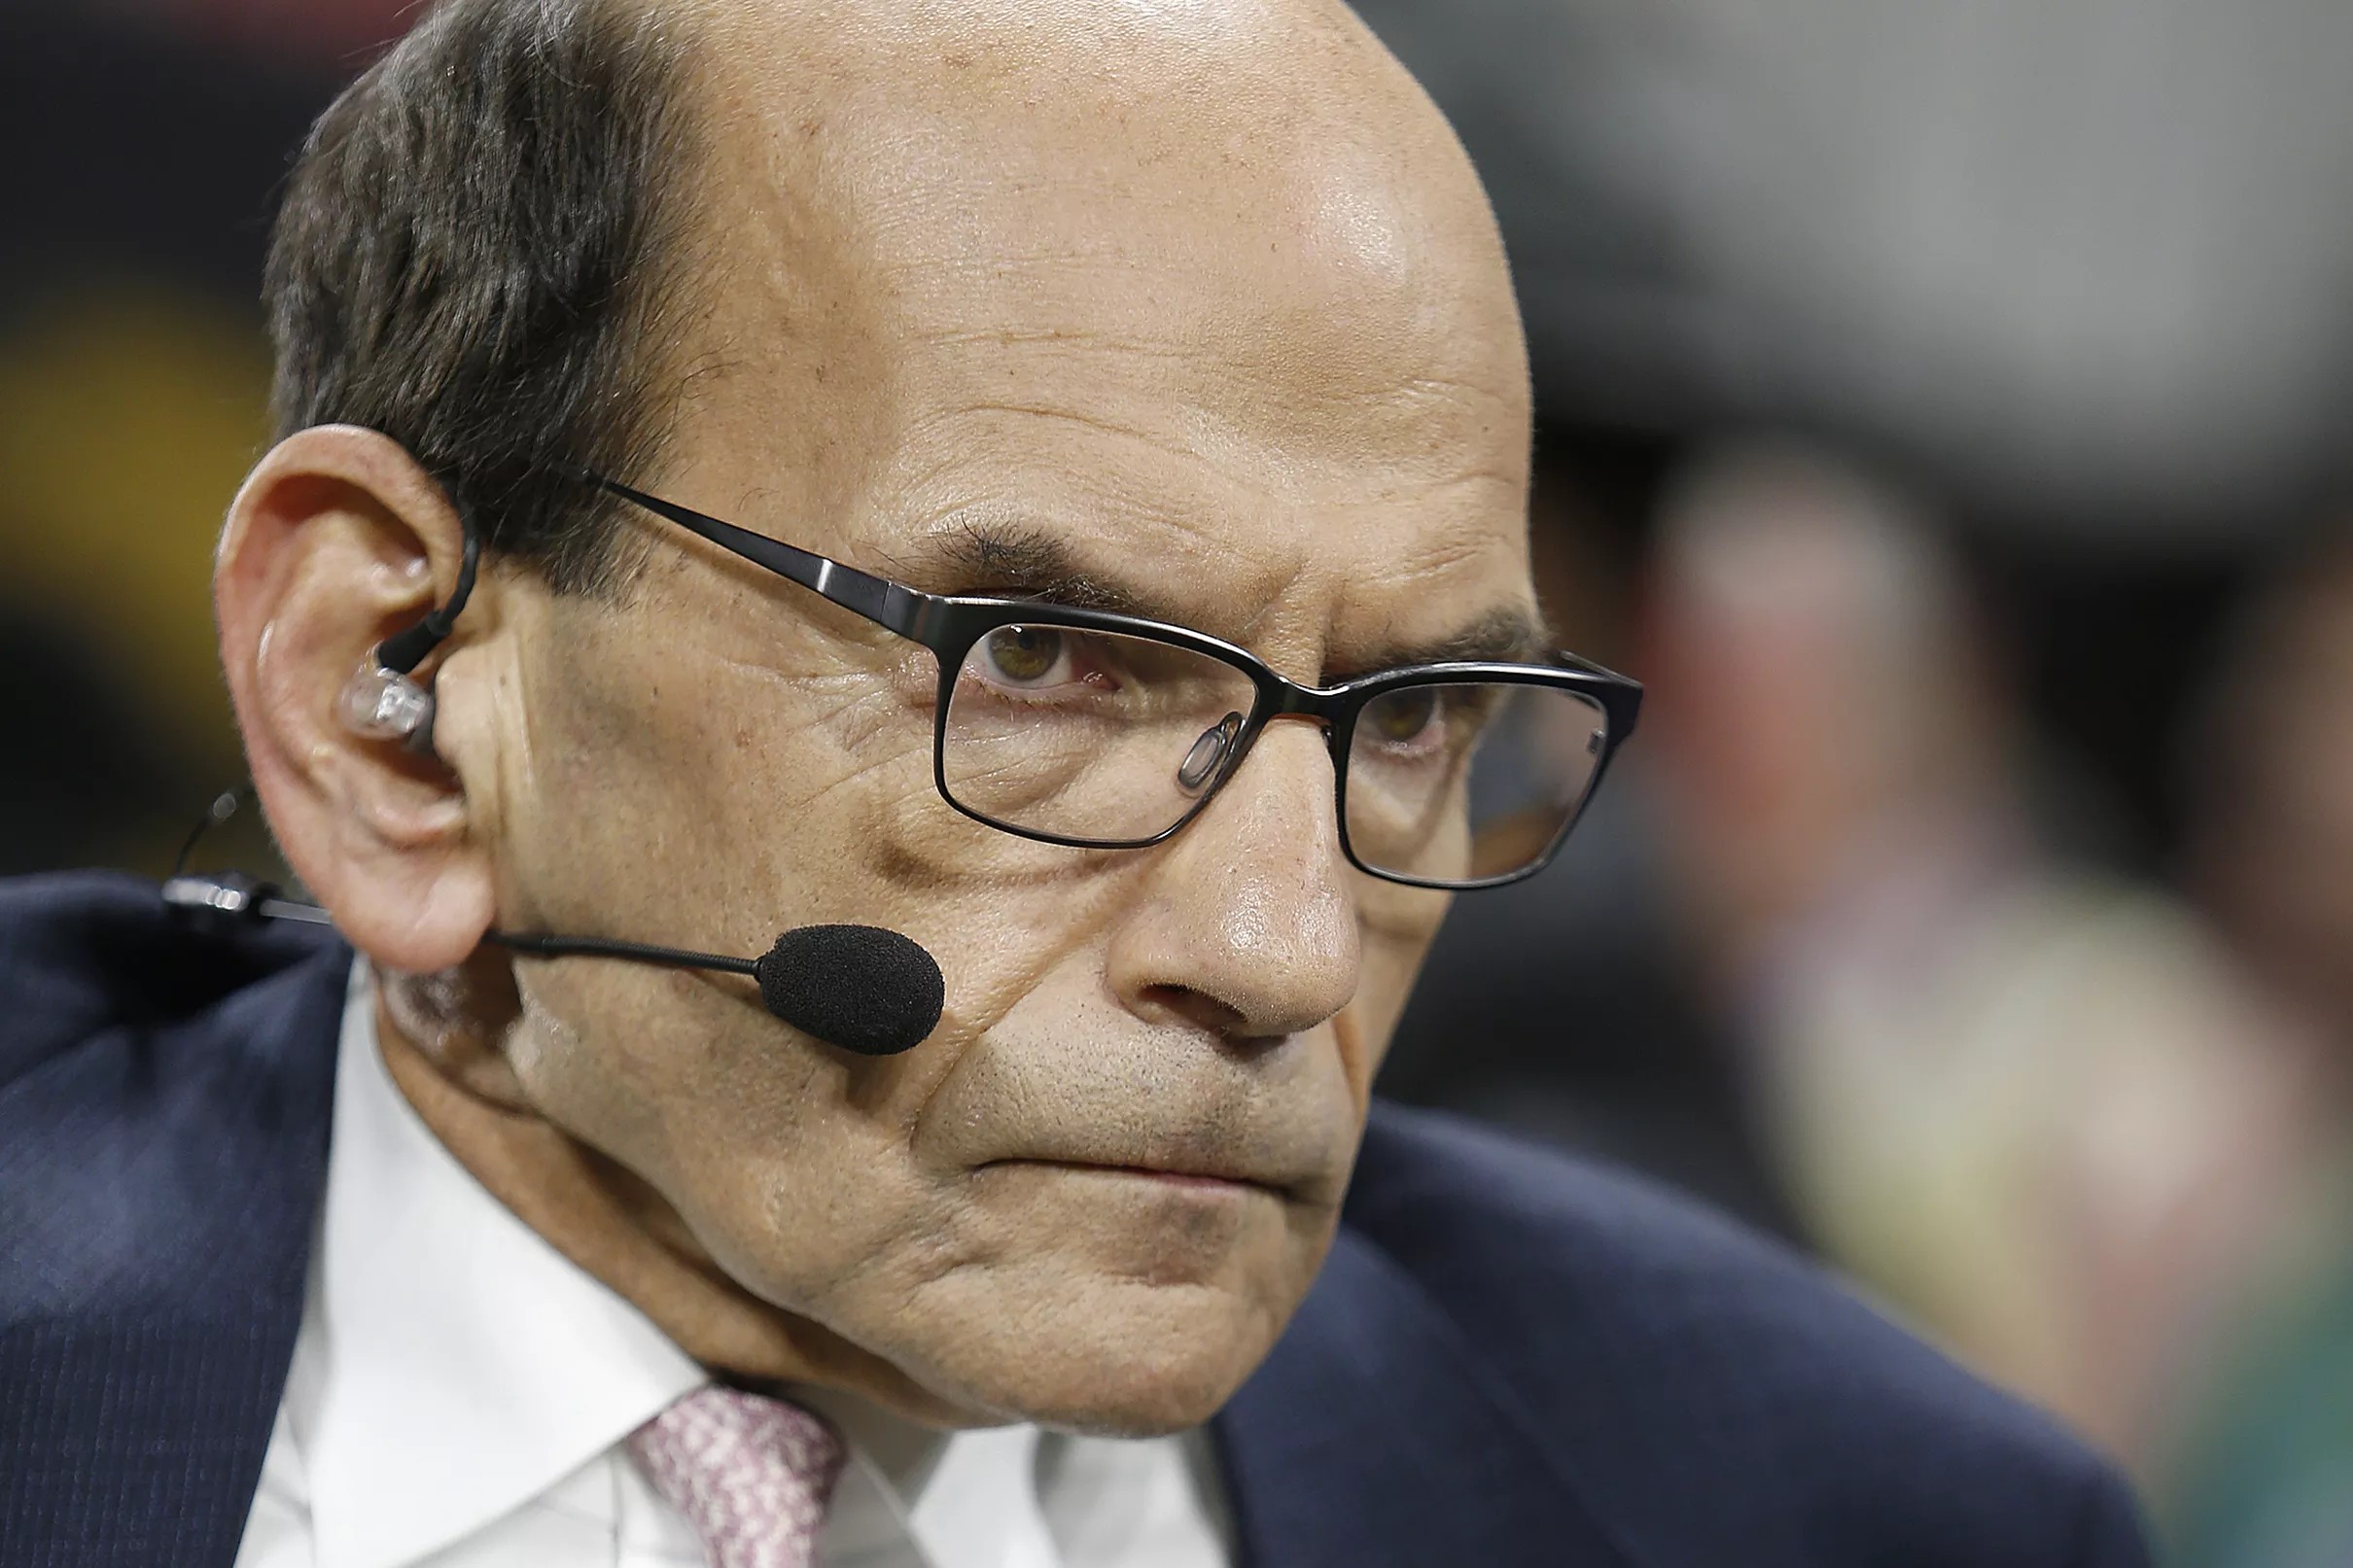 Daily Brews: Paul Finebaum takes another shot at Michigan Football